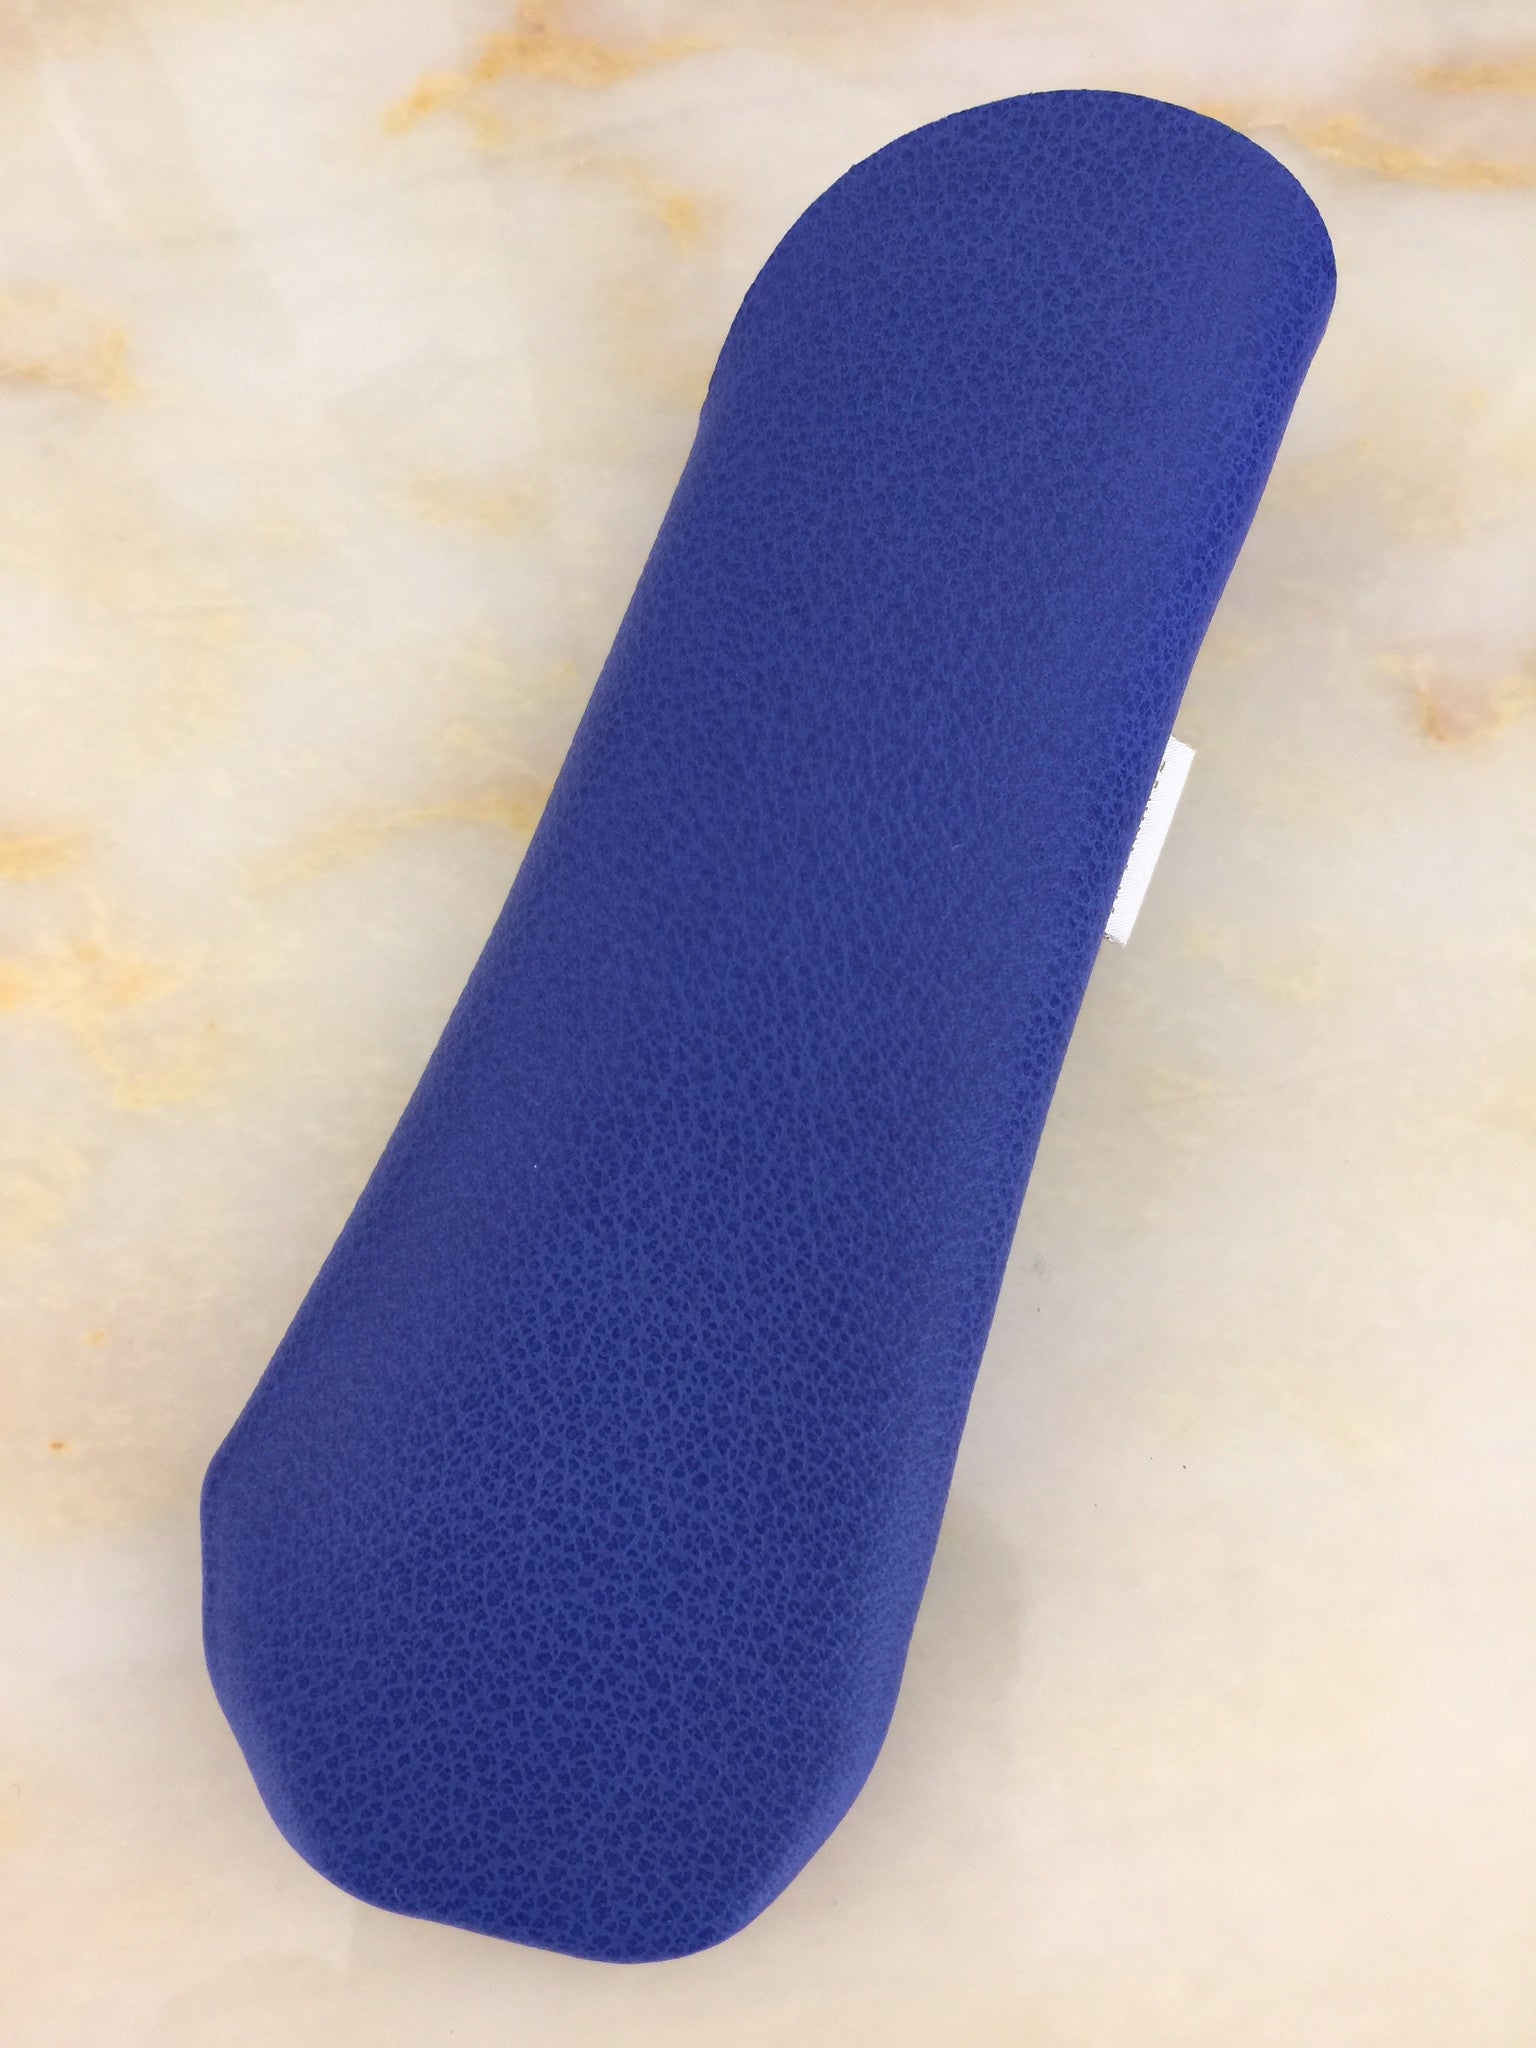 LUCRIN - Thin Glasses Cases - Royal Blue - Genuine Leather